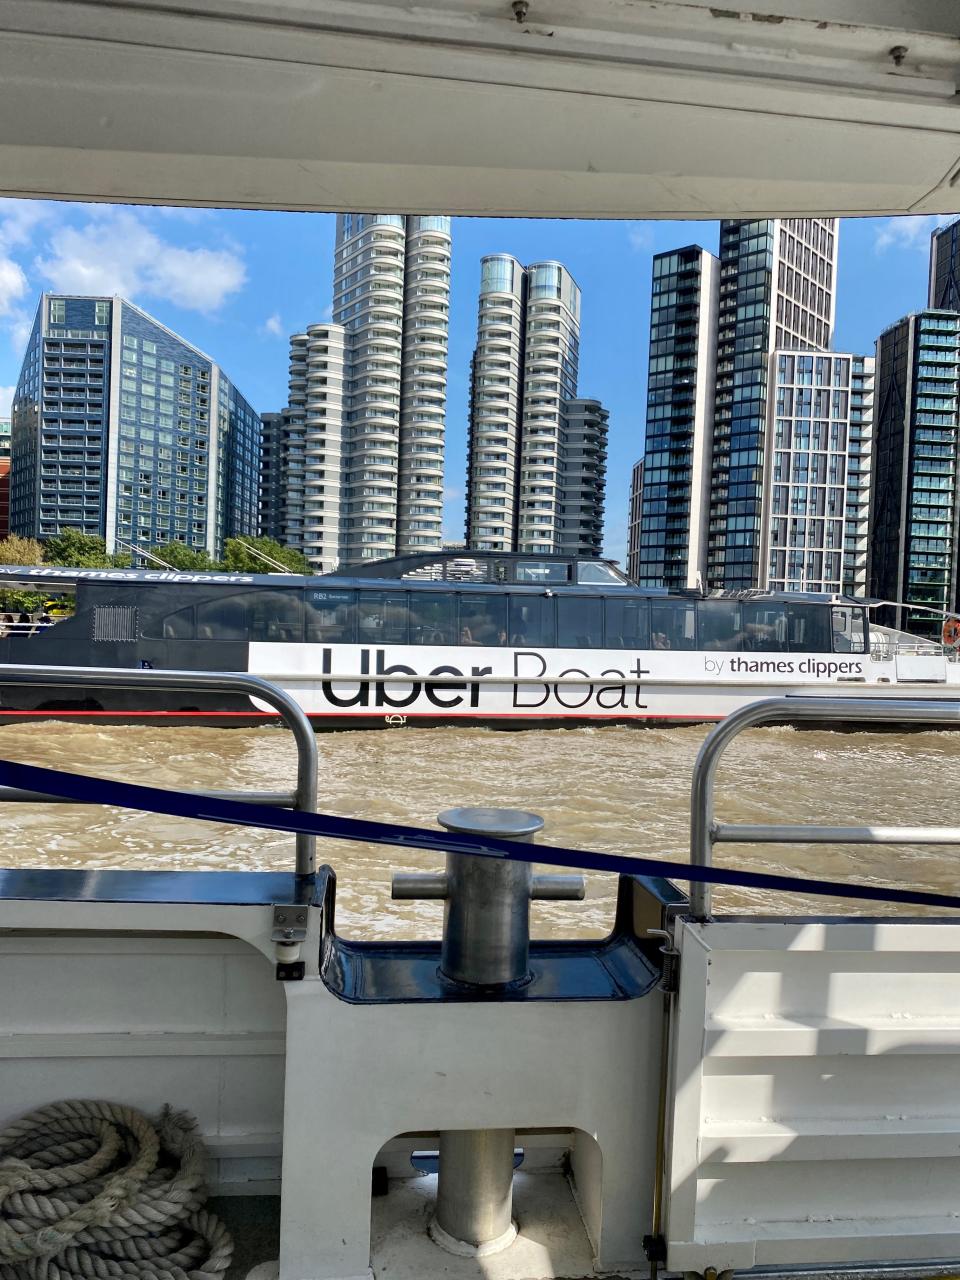 An Uber Boat passing by on the river